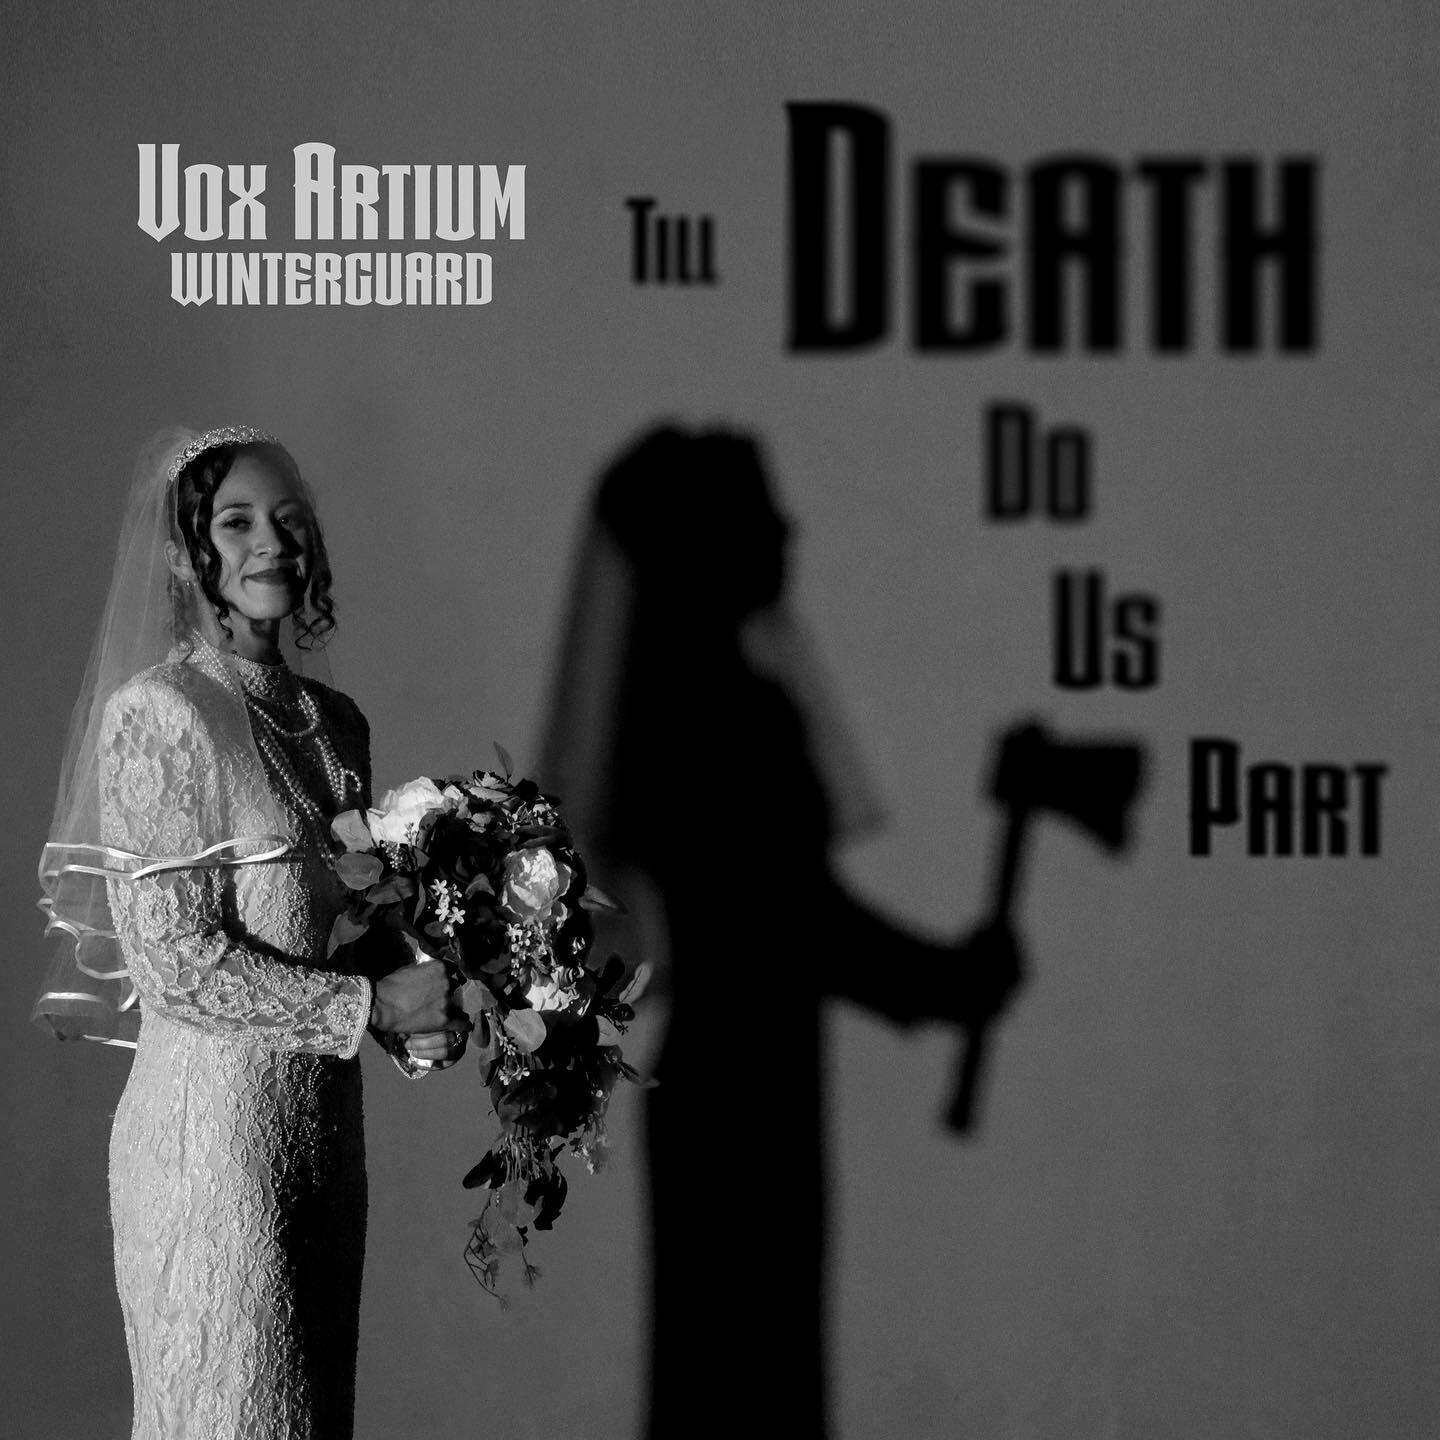 💐 Till Death Do Us Part 🪓
.
Join us for our final wedding ceremony this Sunday, April 23rd at 5:29 pm at the CSULB Pyramid
.
#voxfox #wgasc #vox2023 #wgi #worldchampions #tilldeathdouspart